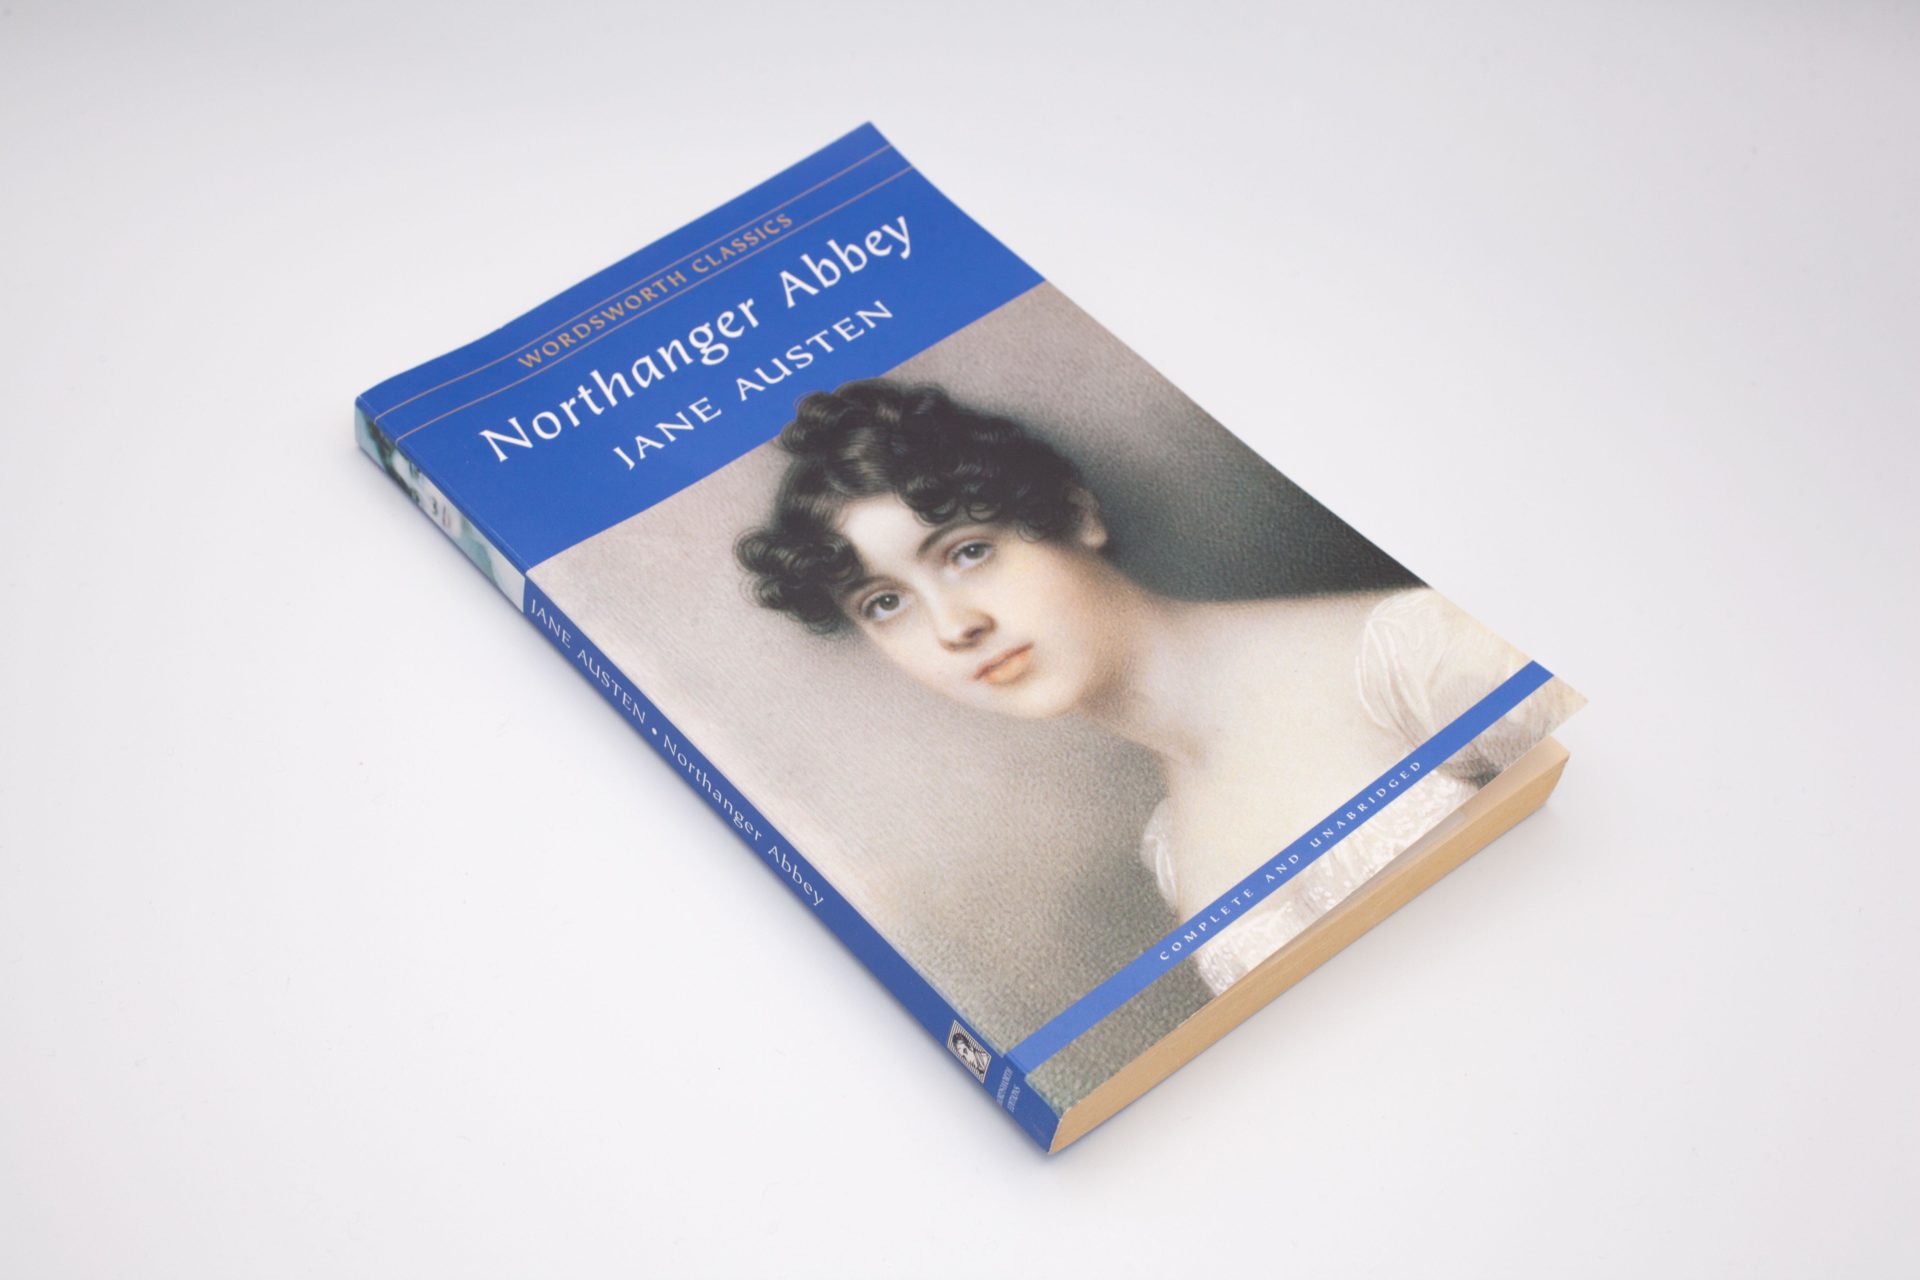 The book, Northanger Abbey by Jane Austen